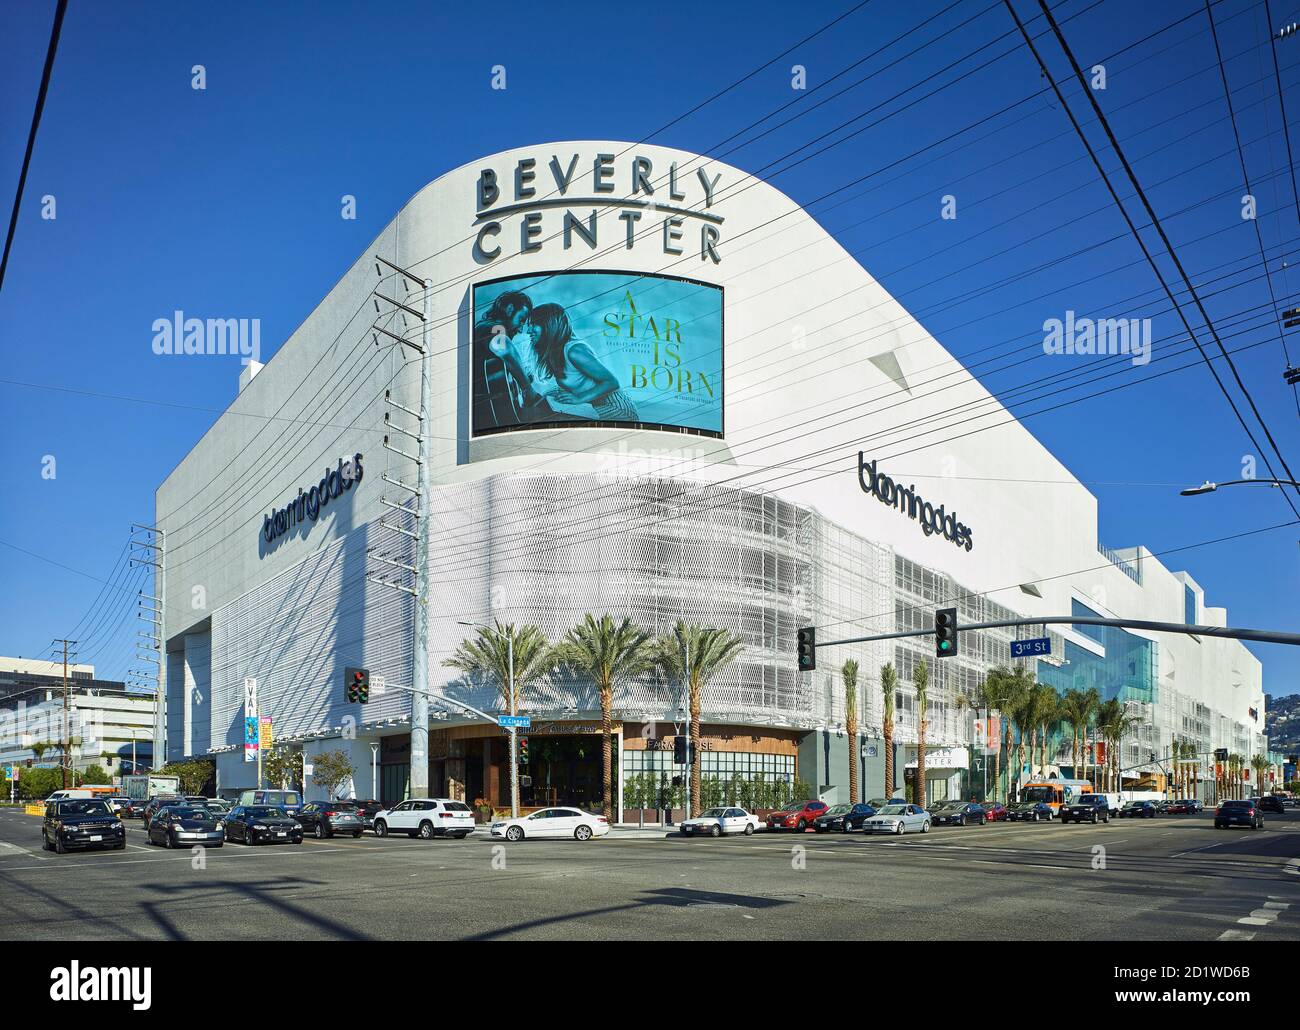 Beverly Center (@beverlycenter) • Instagram photos and videos